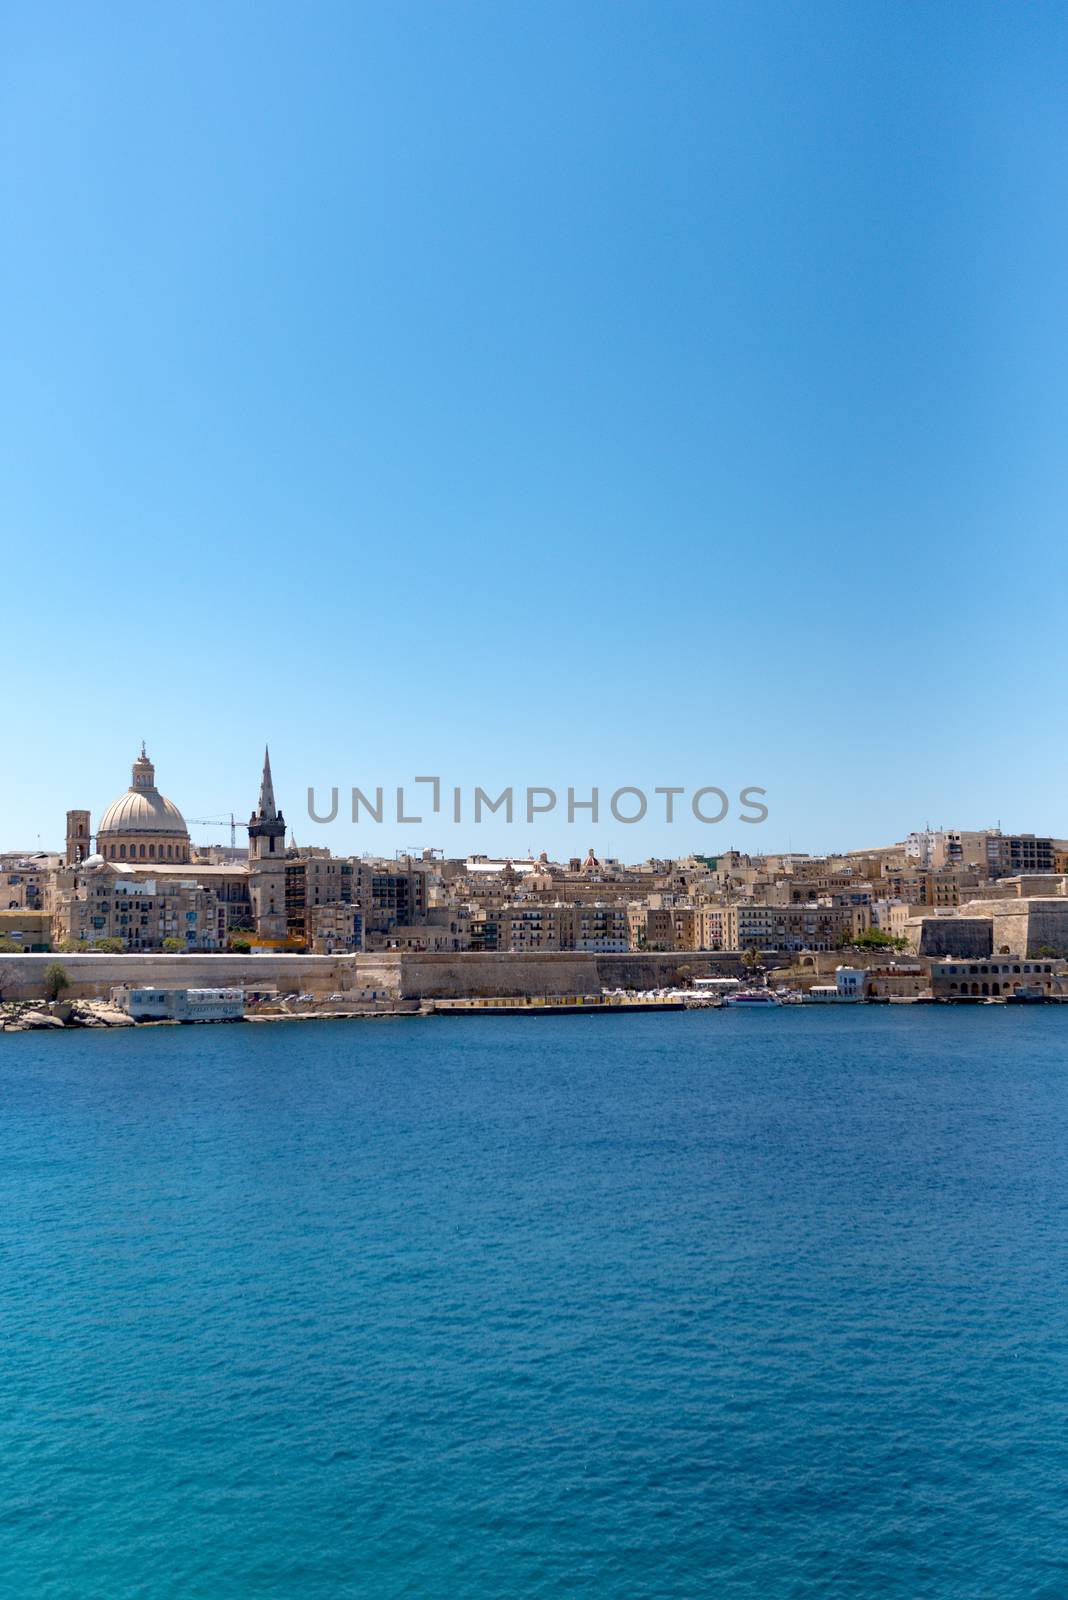 Sliema azure harbour with yachts, Malta,. by martinscphoto